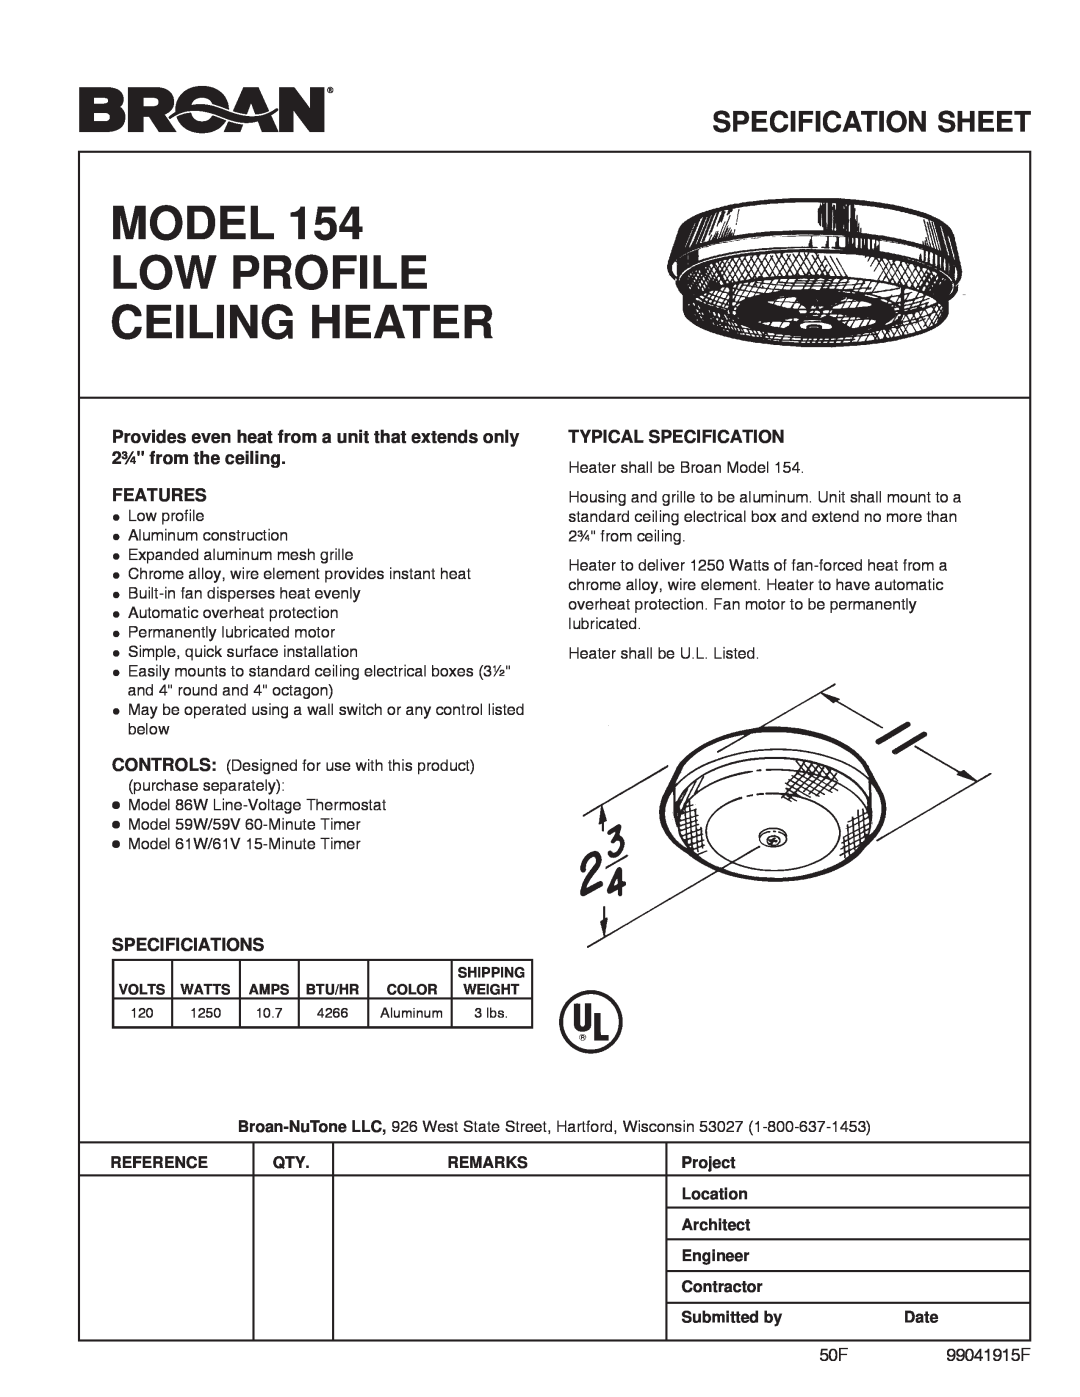 Broan 61V specifications Model Low Profile Ceiling Heater, Specification Sheet, Features, Specificiations, 50F99041915F 